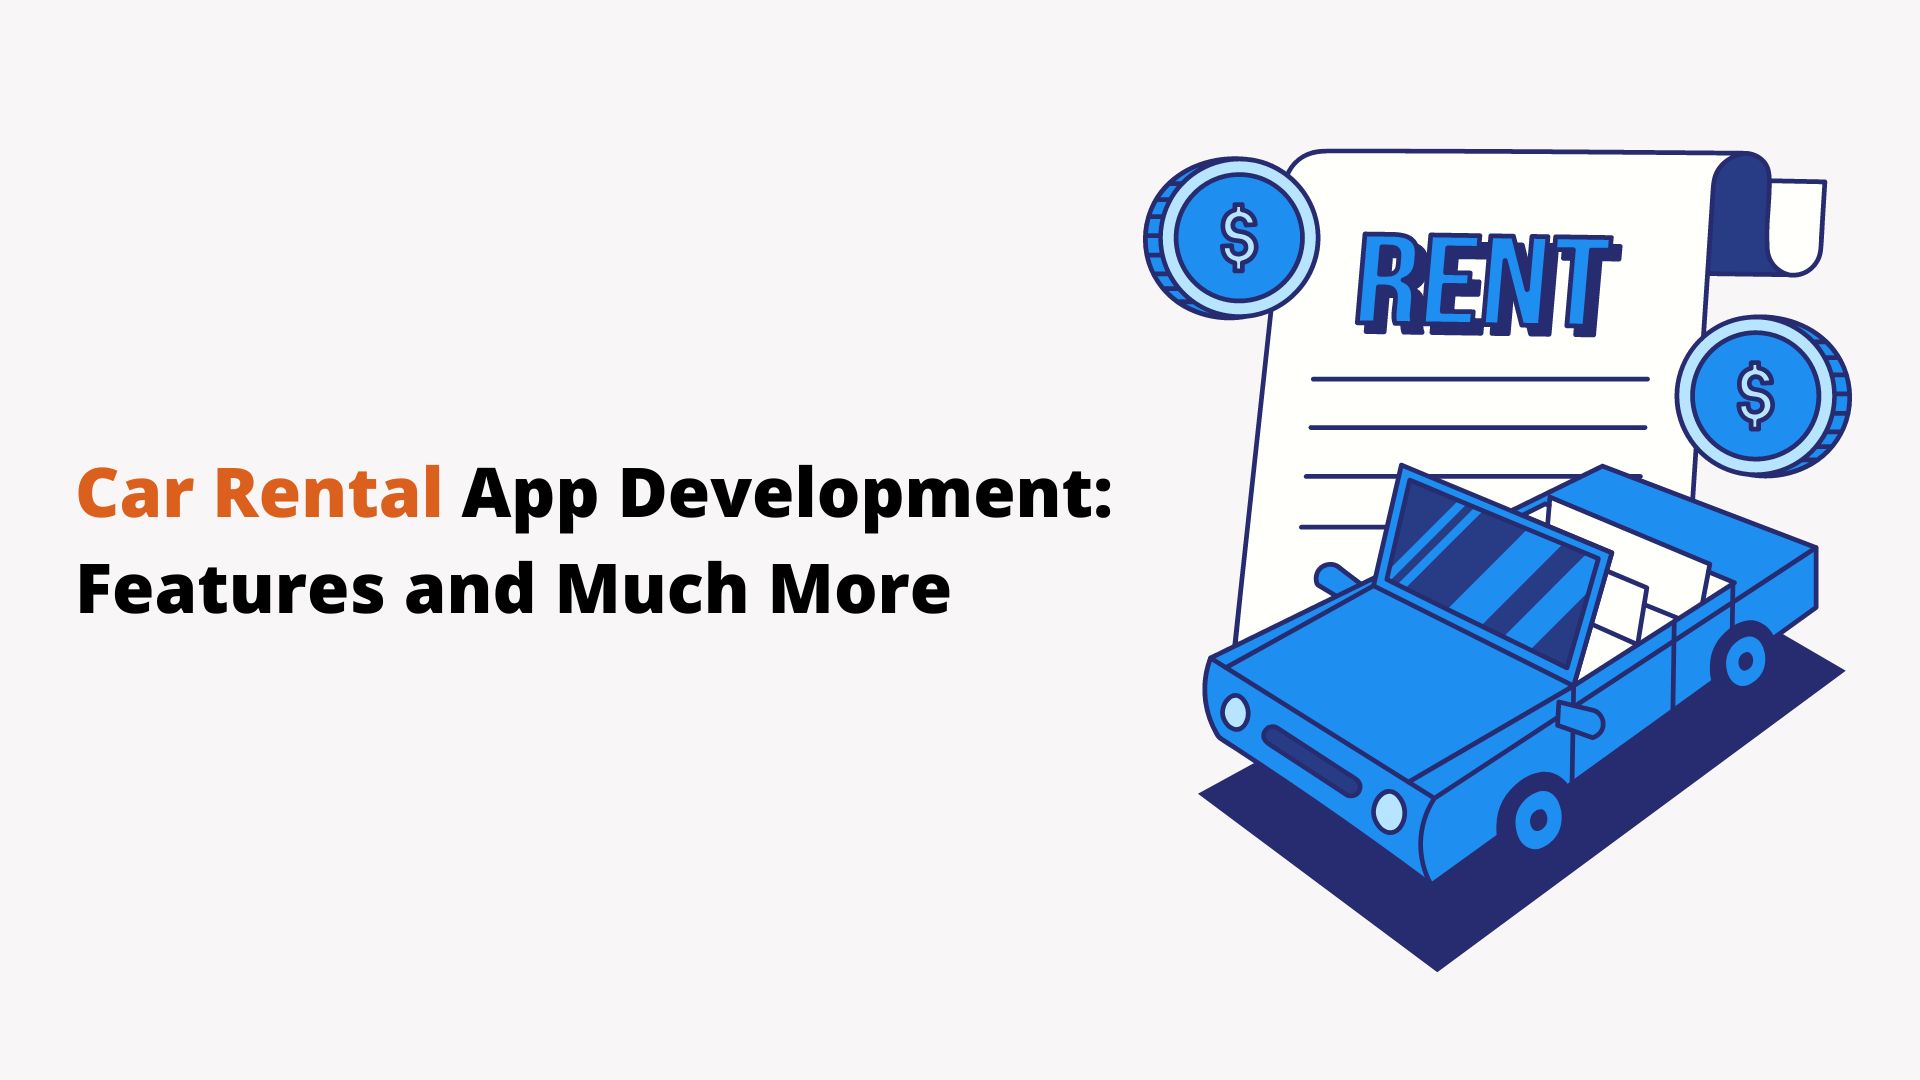 Car Rental App Development: Features and Much More